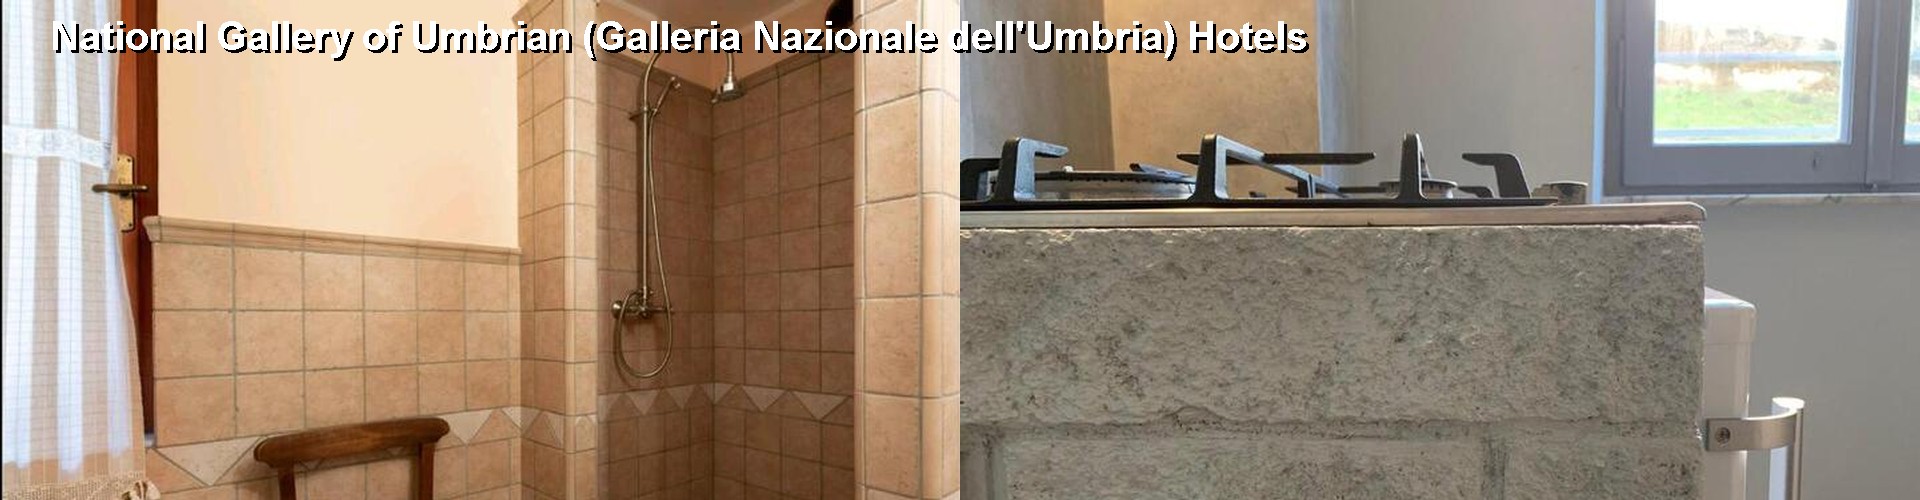 5 Best Hotels near National Gallery of Umbrian (Galleria Nazionale dell'Umbria)